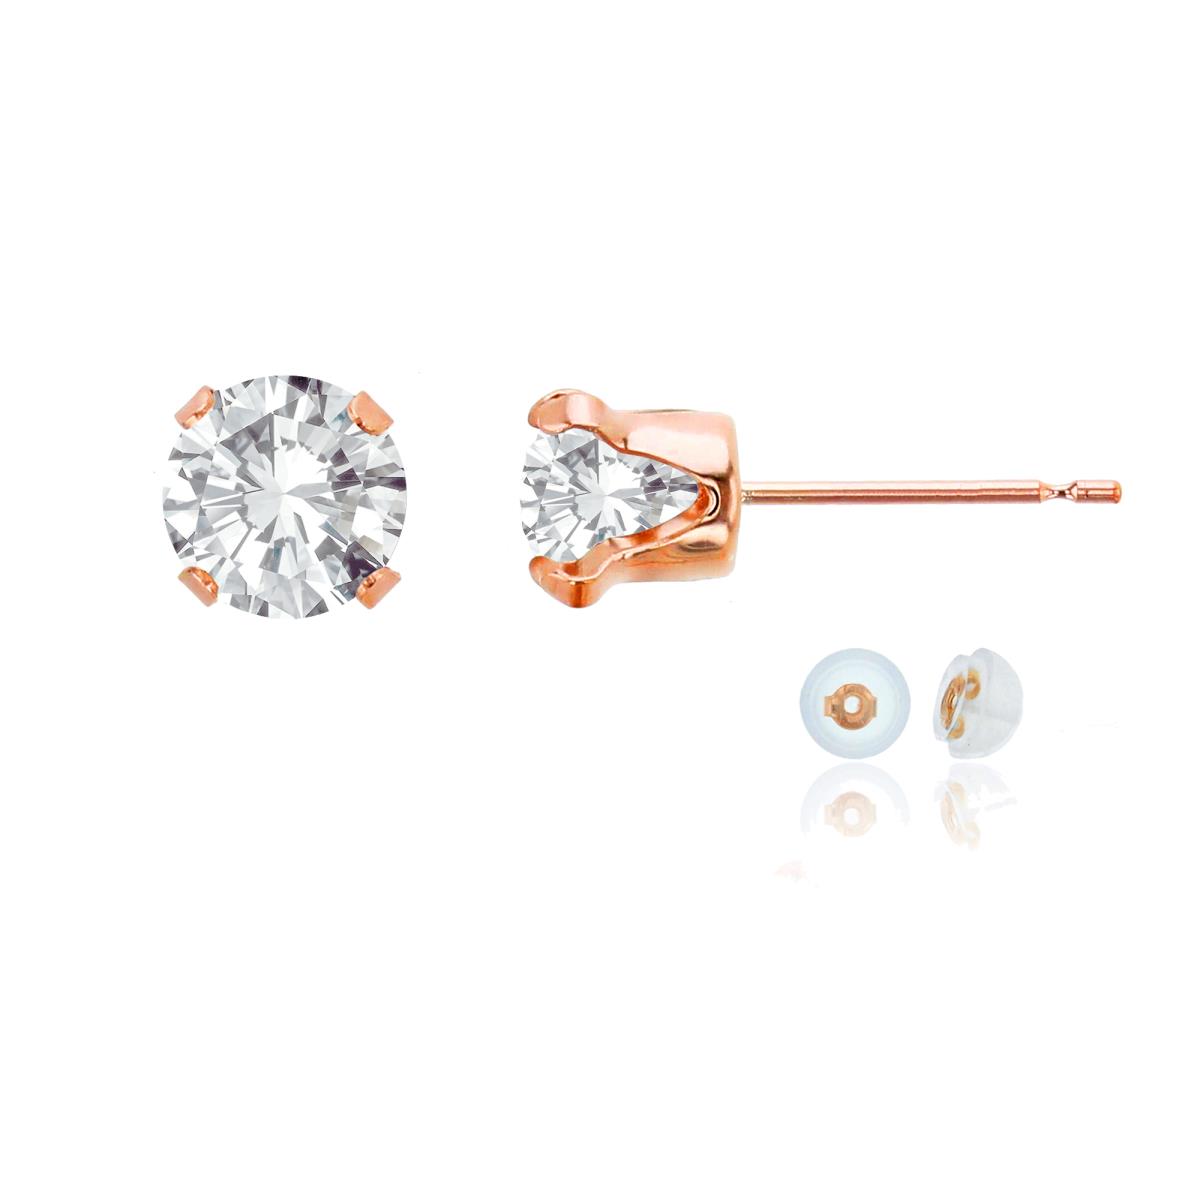 10K Rose Gold 6mm Round White Topaz Stud Earring with Silicone Back